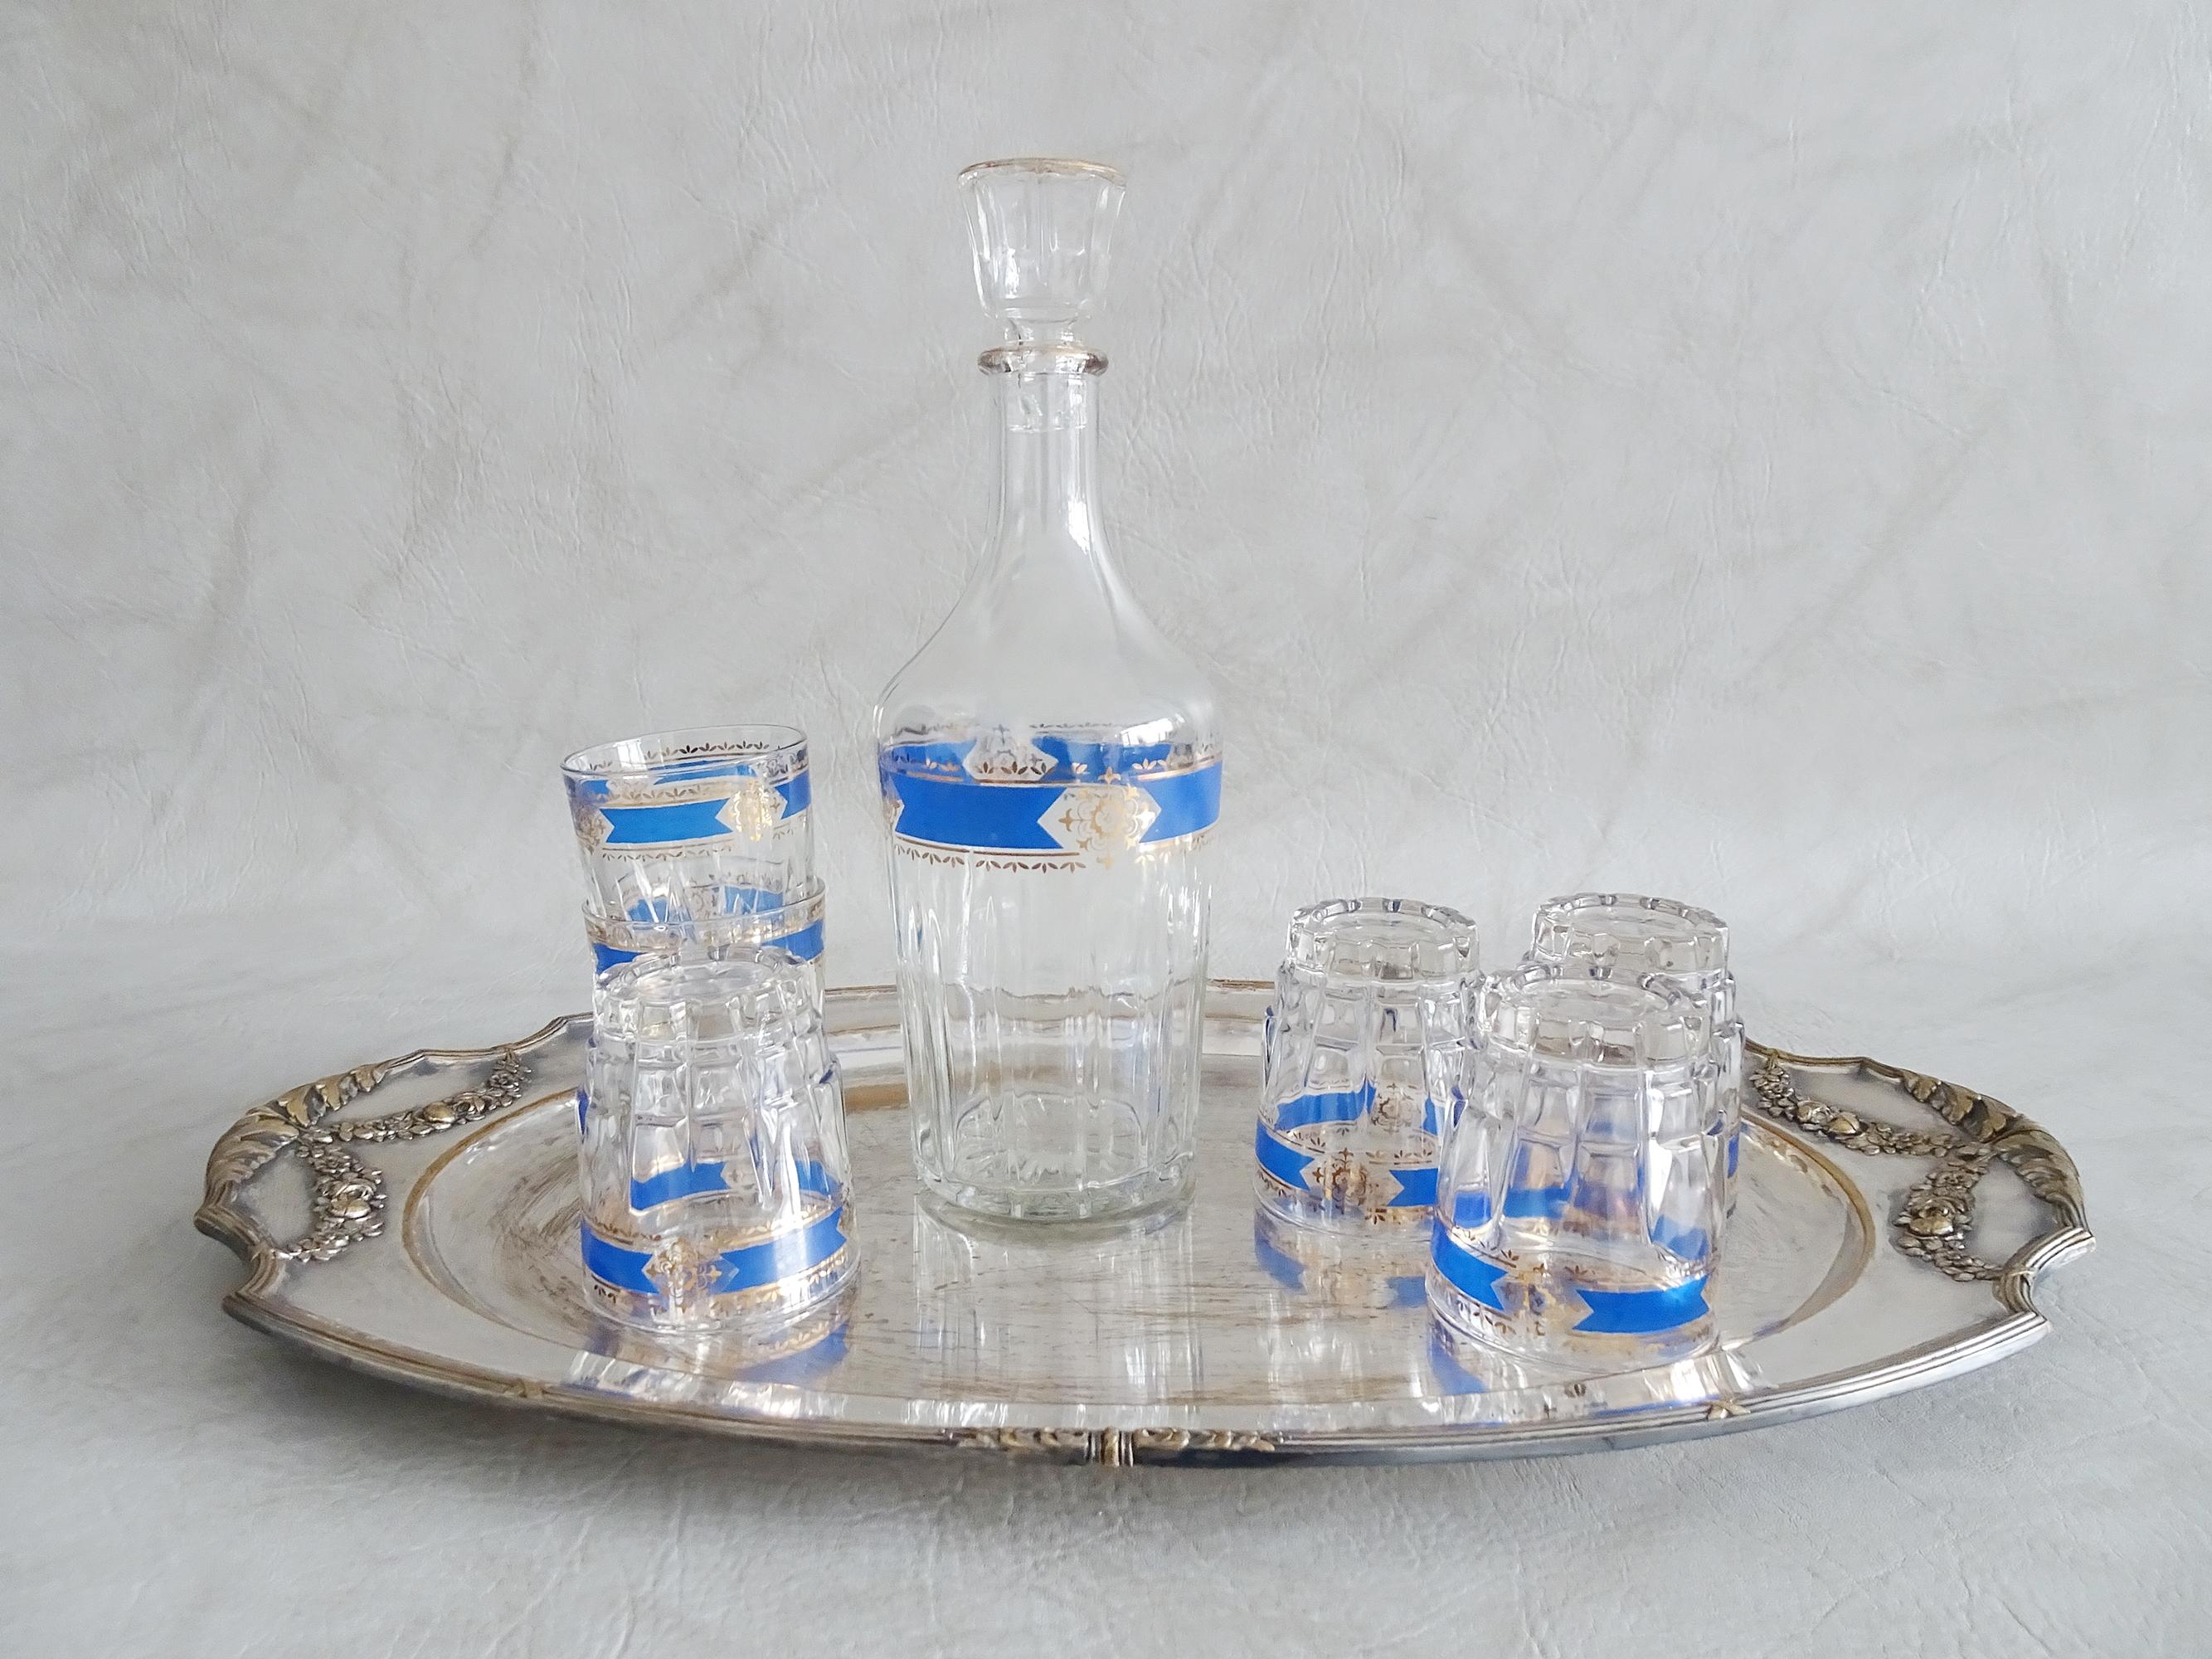 Stylish bar set consisting of a decanter with six glasses and a tray. Italian glass from Cristallerie Artistiche DEP in a noble blue gold decor and a silver-plated tray with golden floral ornaments.

An elegant drinking set that is perfect for